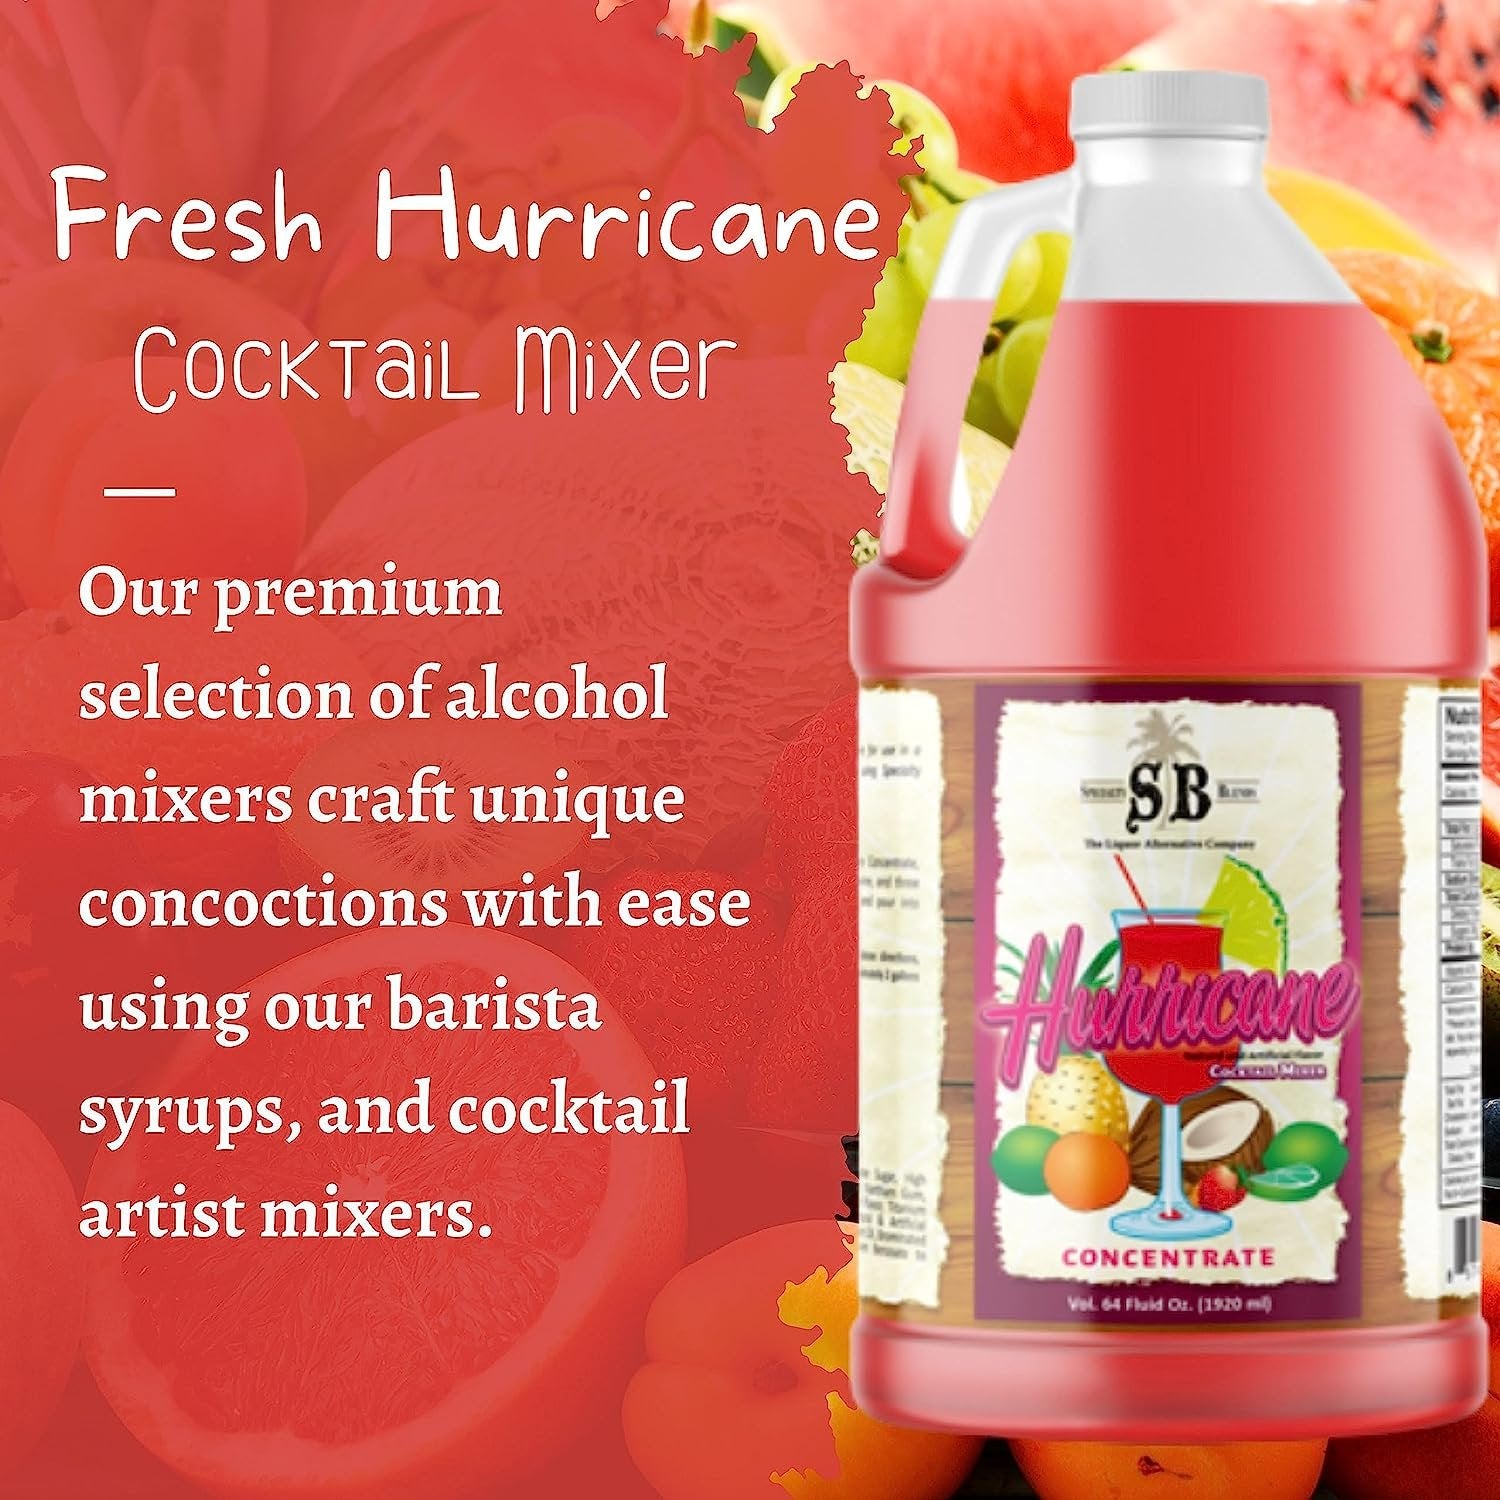 Specialty Blends Hurricane Flavored Syrup Cocktail Mixer Concentrate, Made with Hurricane Flavor Syrups For Drinks, 1/2 Gallon (Pack of 1) - with Bonus Worldwide Nutrition Multi Purpose Key Chain